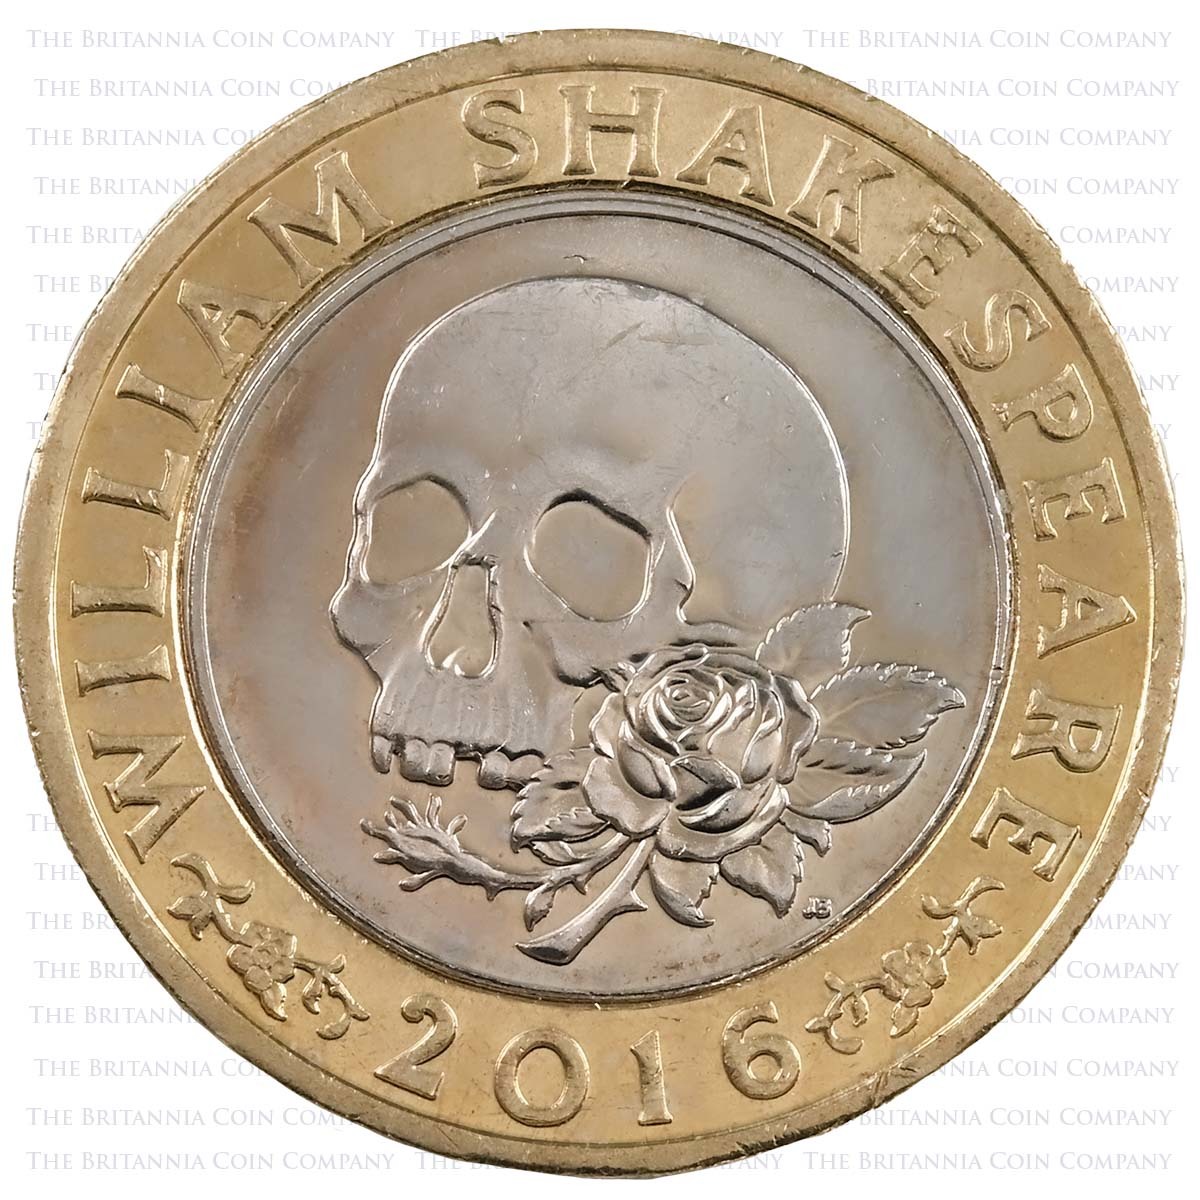 2016 William Shakespeare's Tragedies Circulated Two Pound Coin Reverse